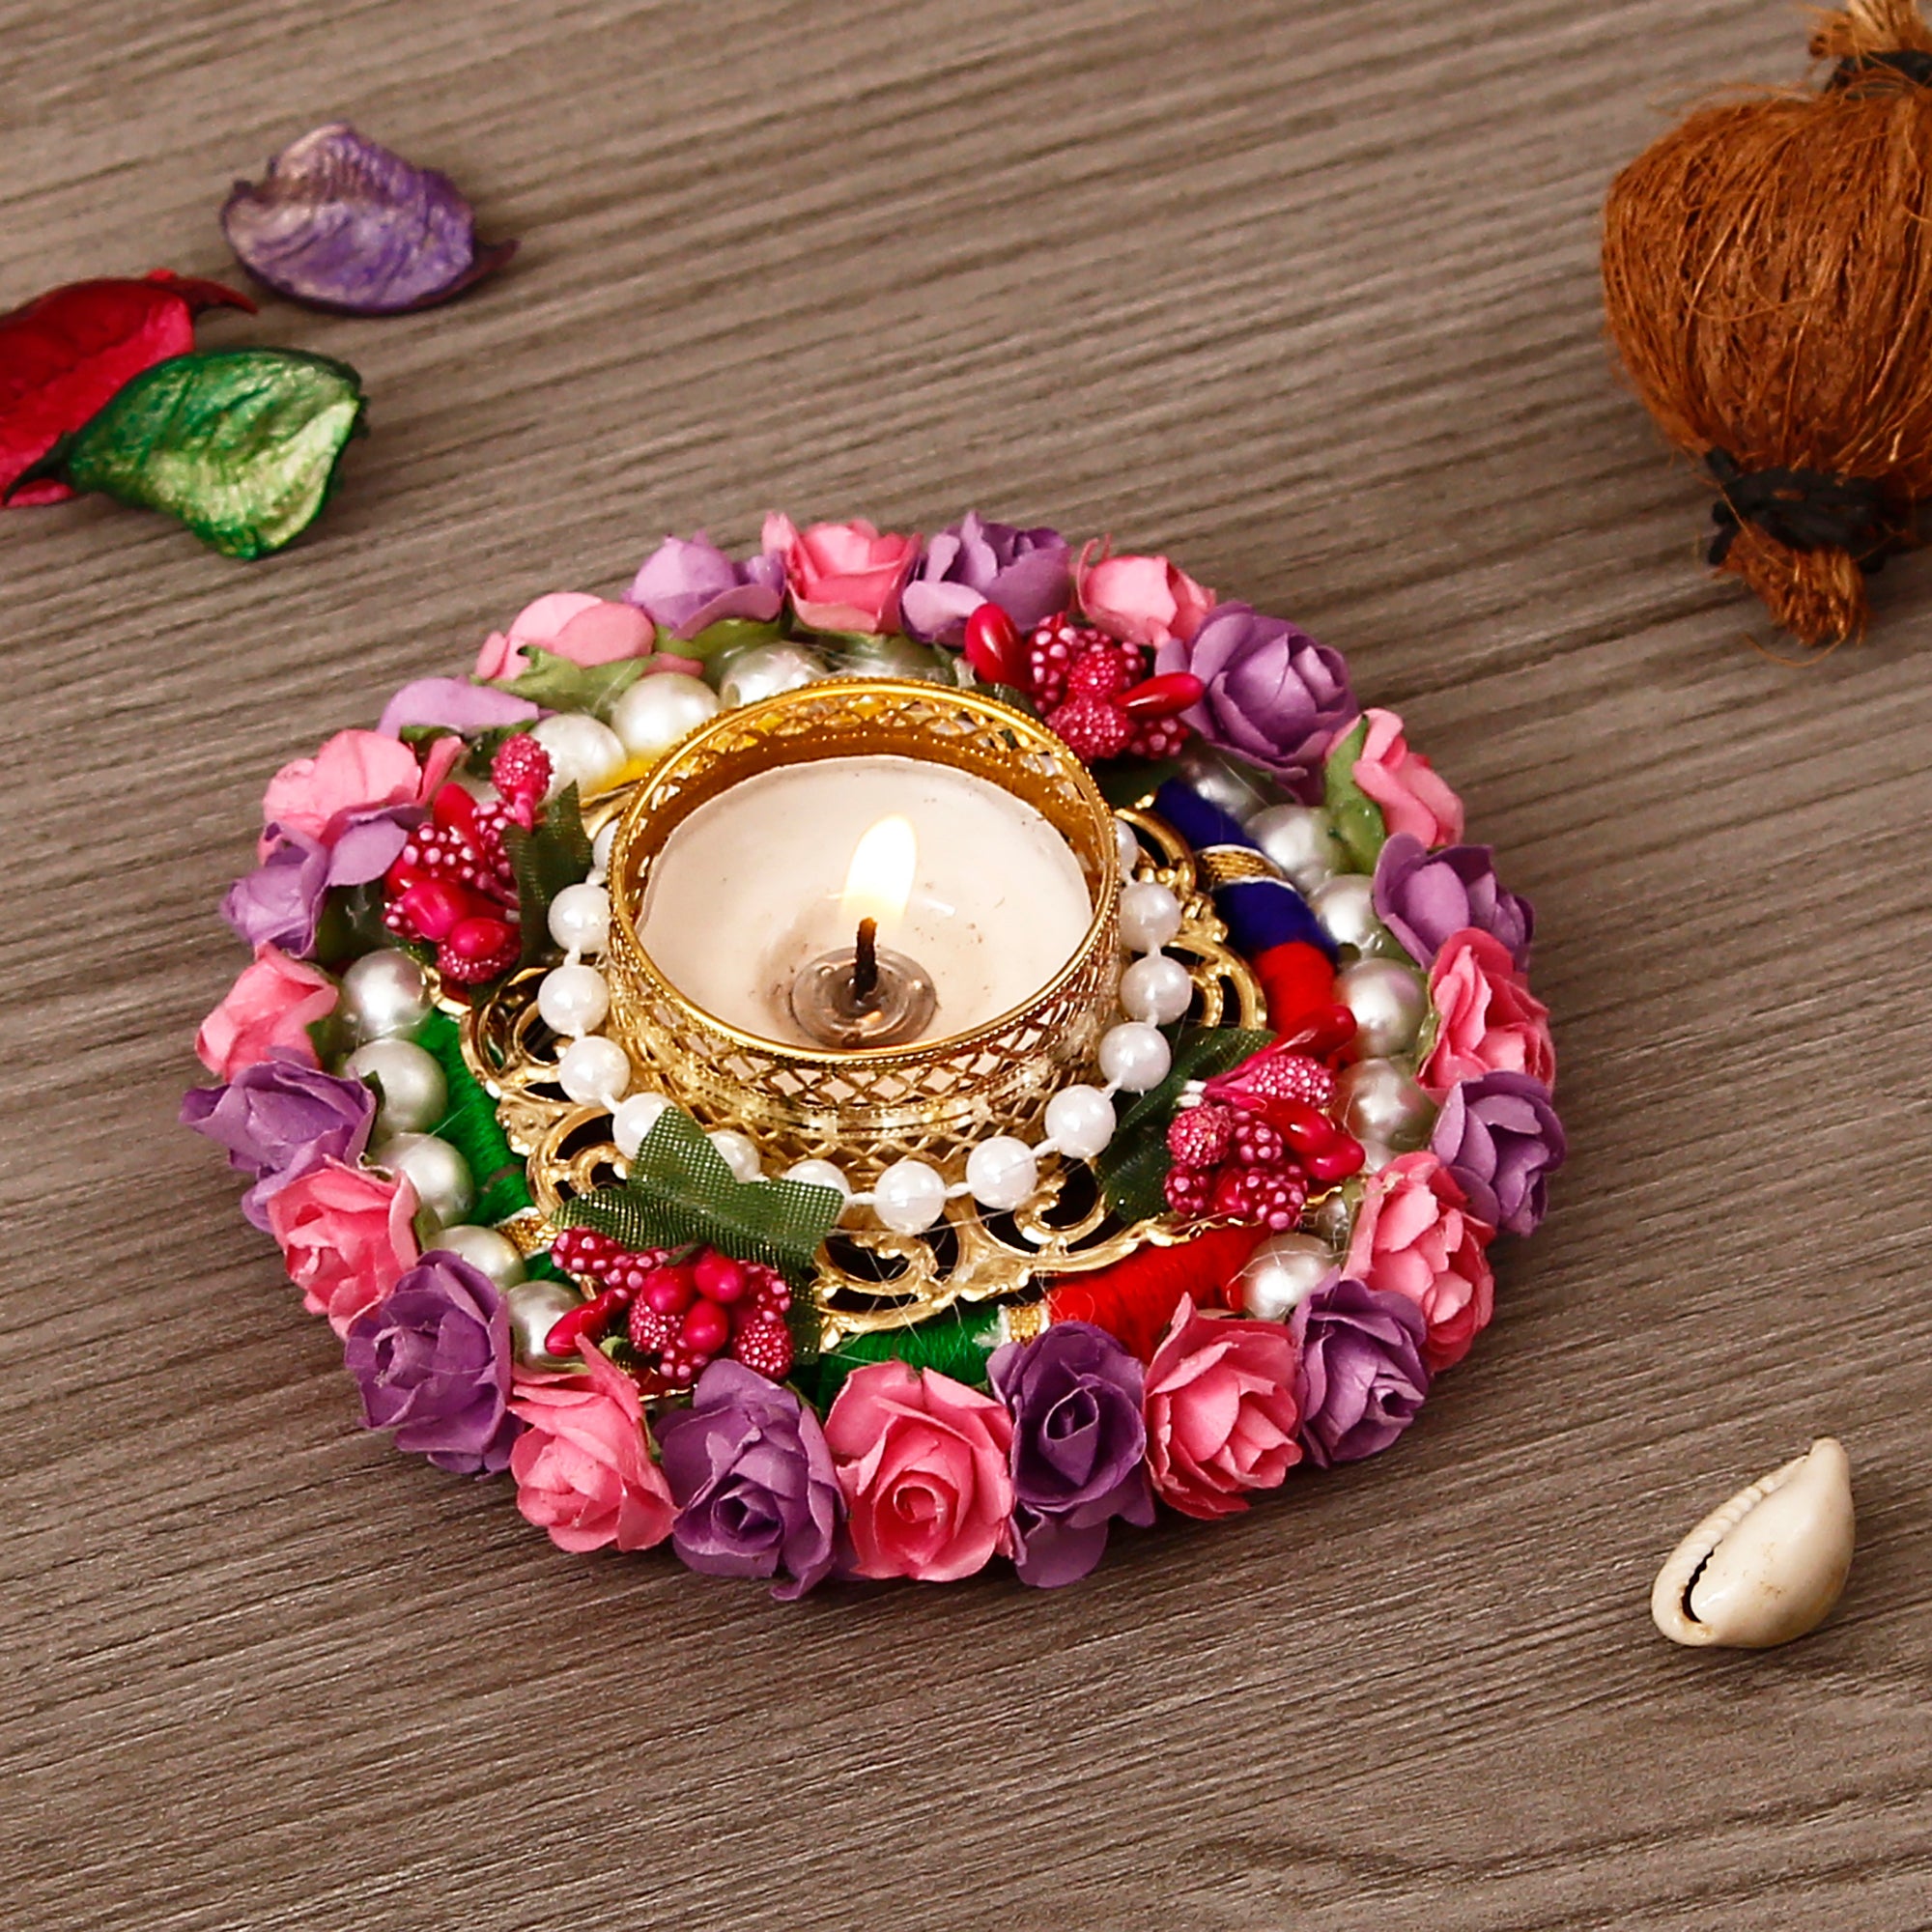 Pink And Purple Floral Handicrafted Round Tea Light Holder